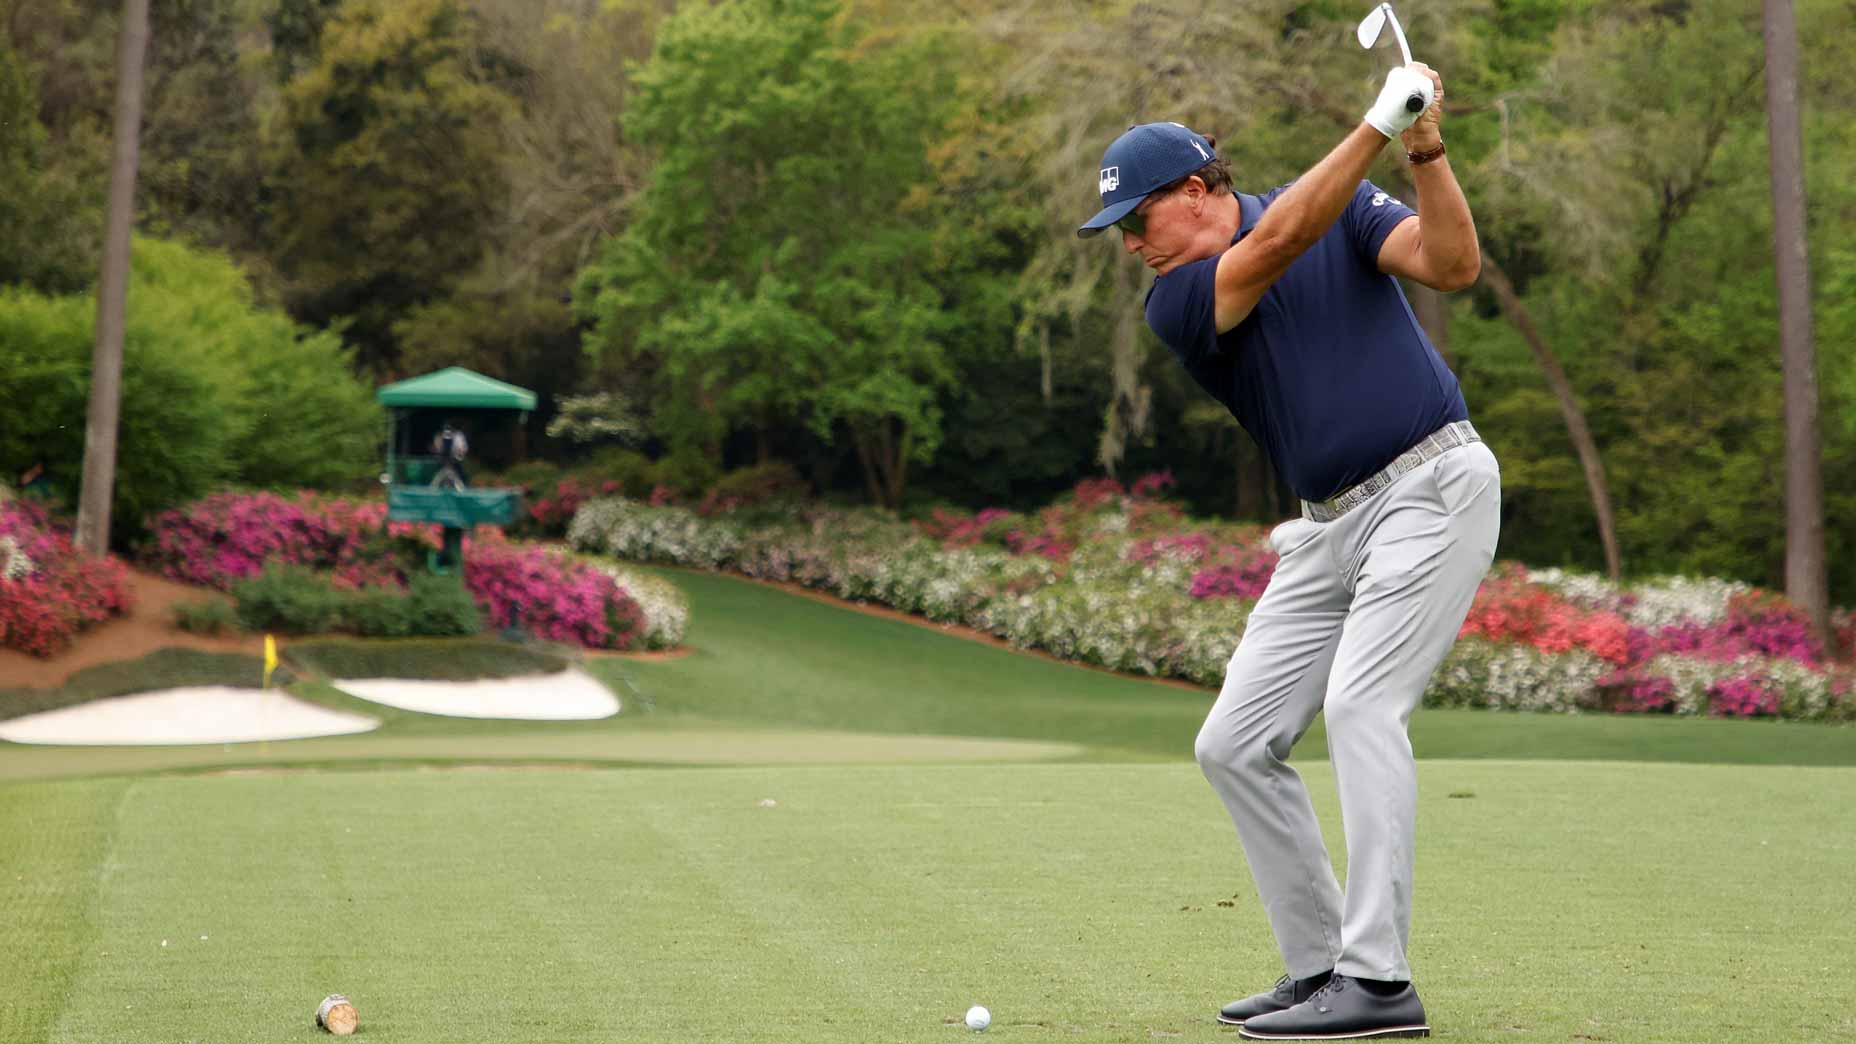 Phil Mickelson hits a shot at the 12 hole of Augusta National.